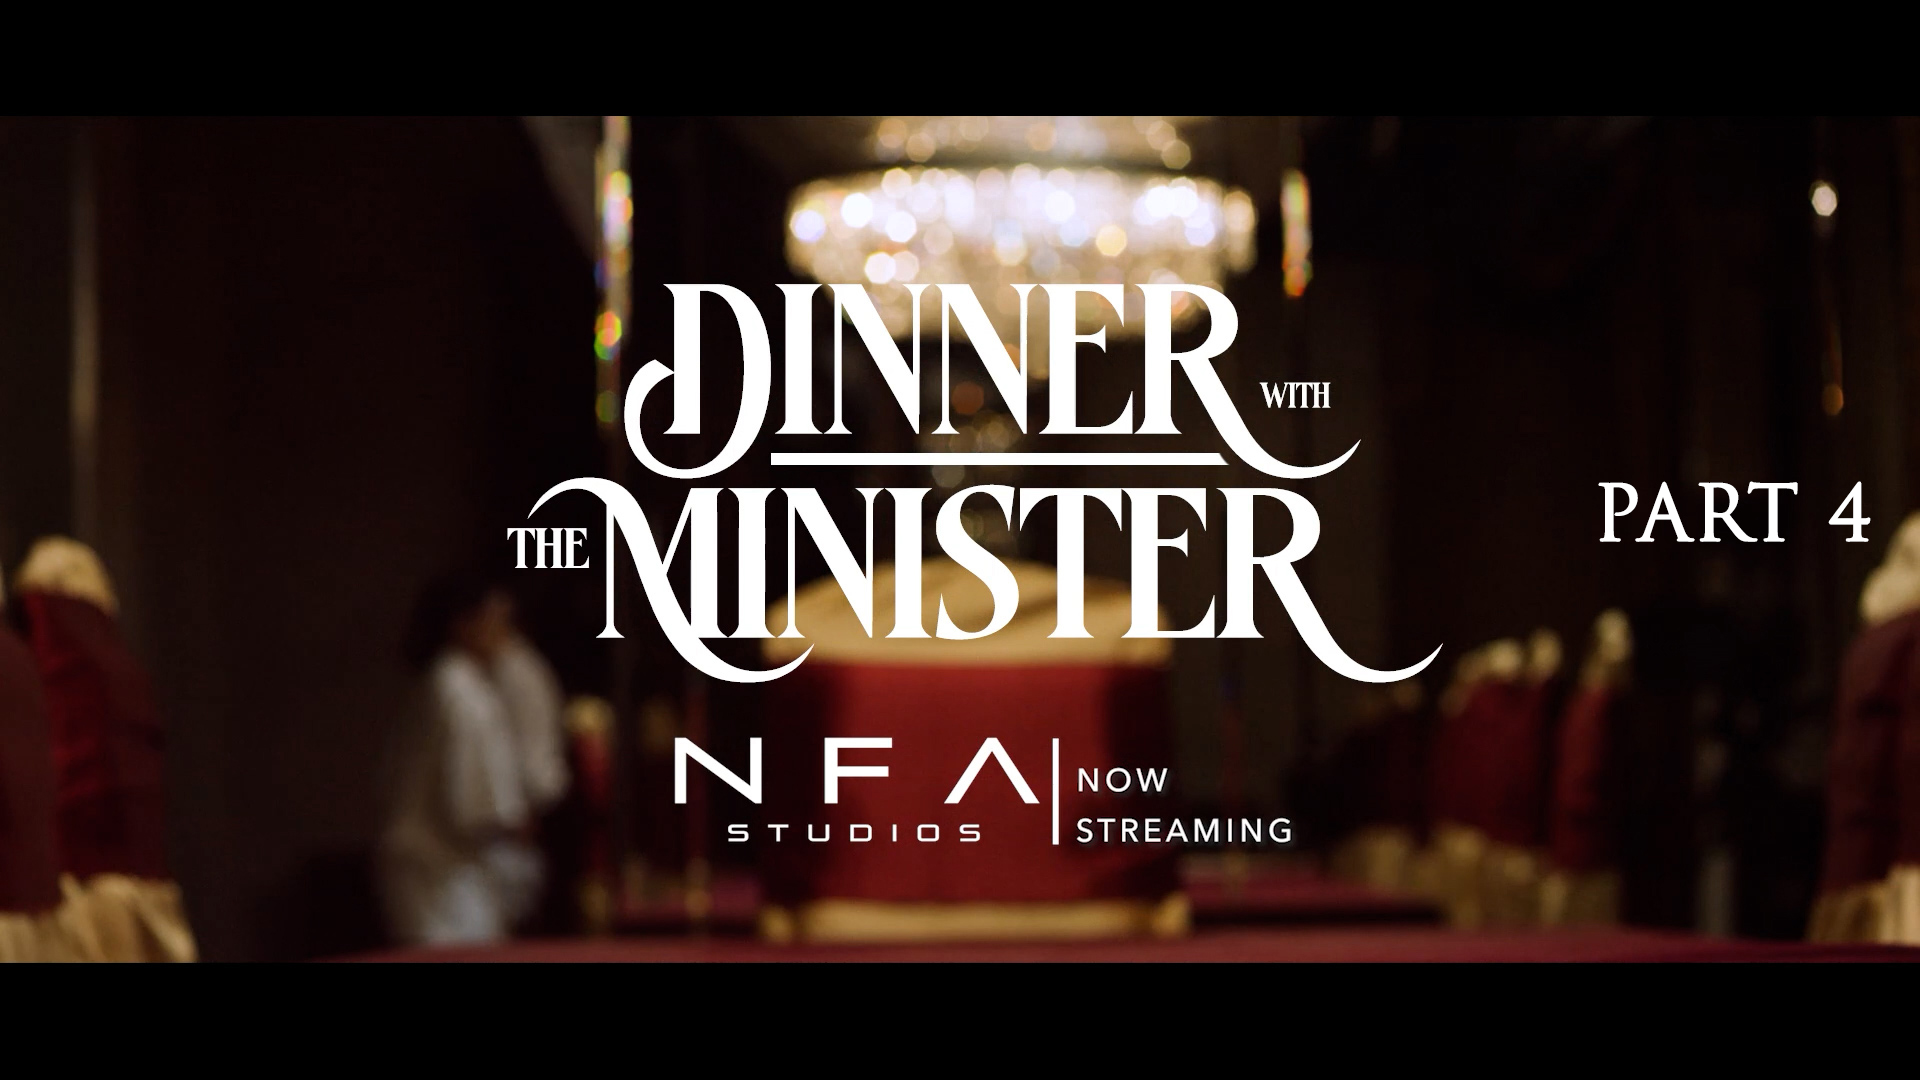 Part 4: NFA Studios presents Dinner with The Minister